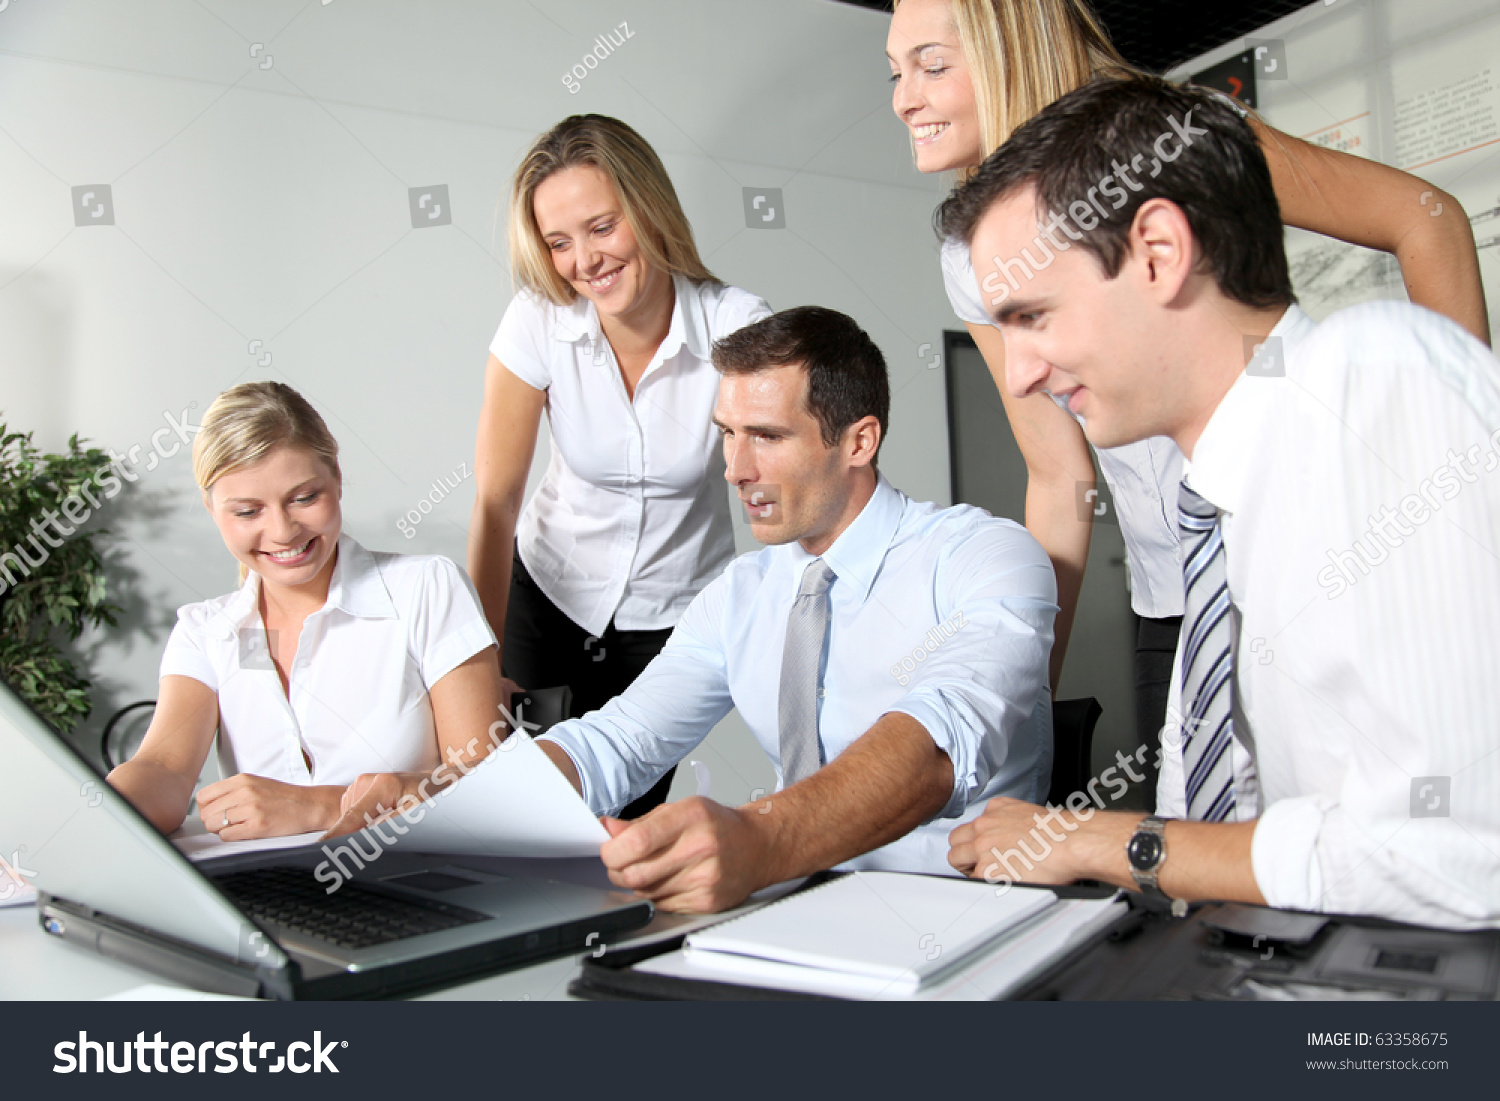 Group of business people meeting in the office #63358675